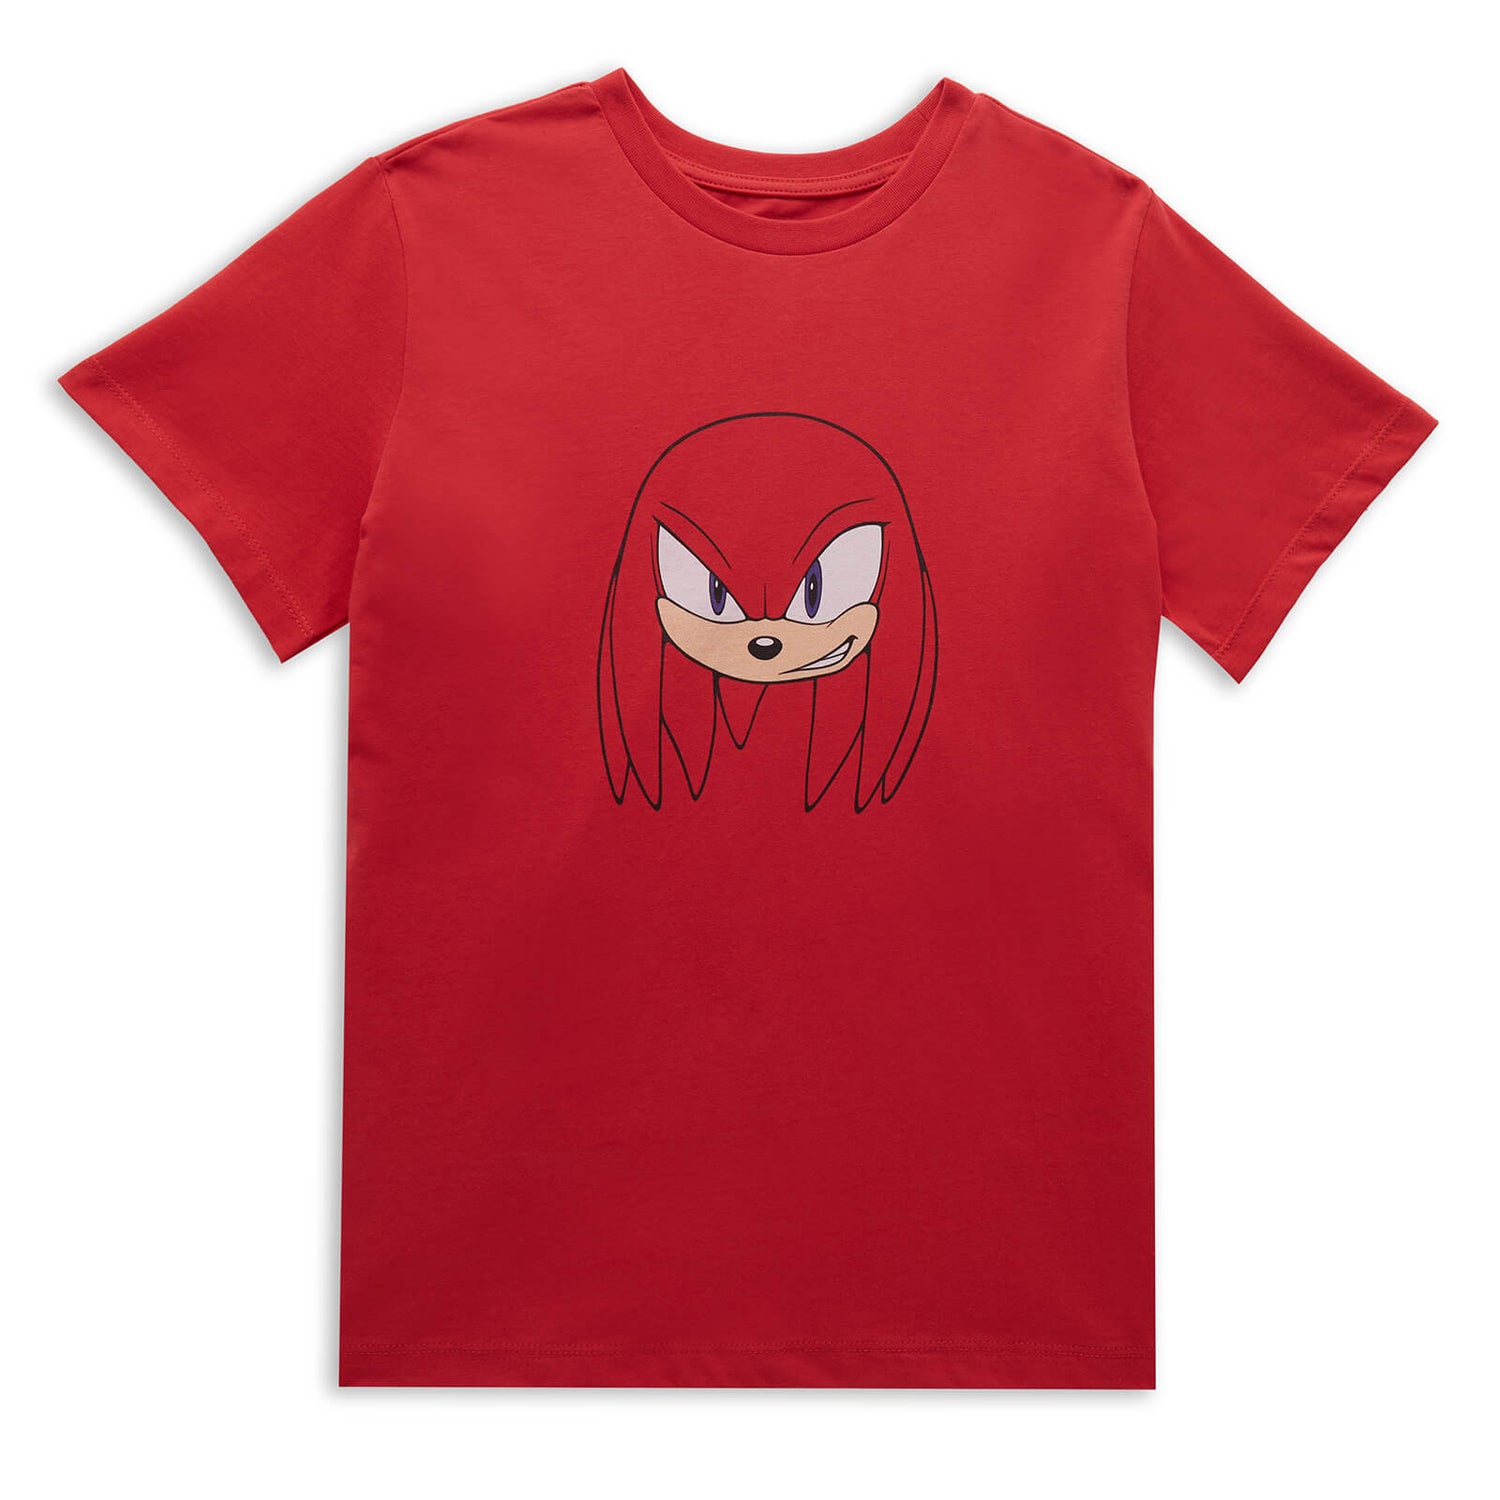 Sonic The Hedgehog Knuckles Face Kids' T-Shirt - Red